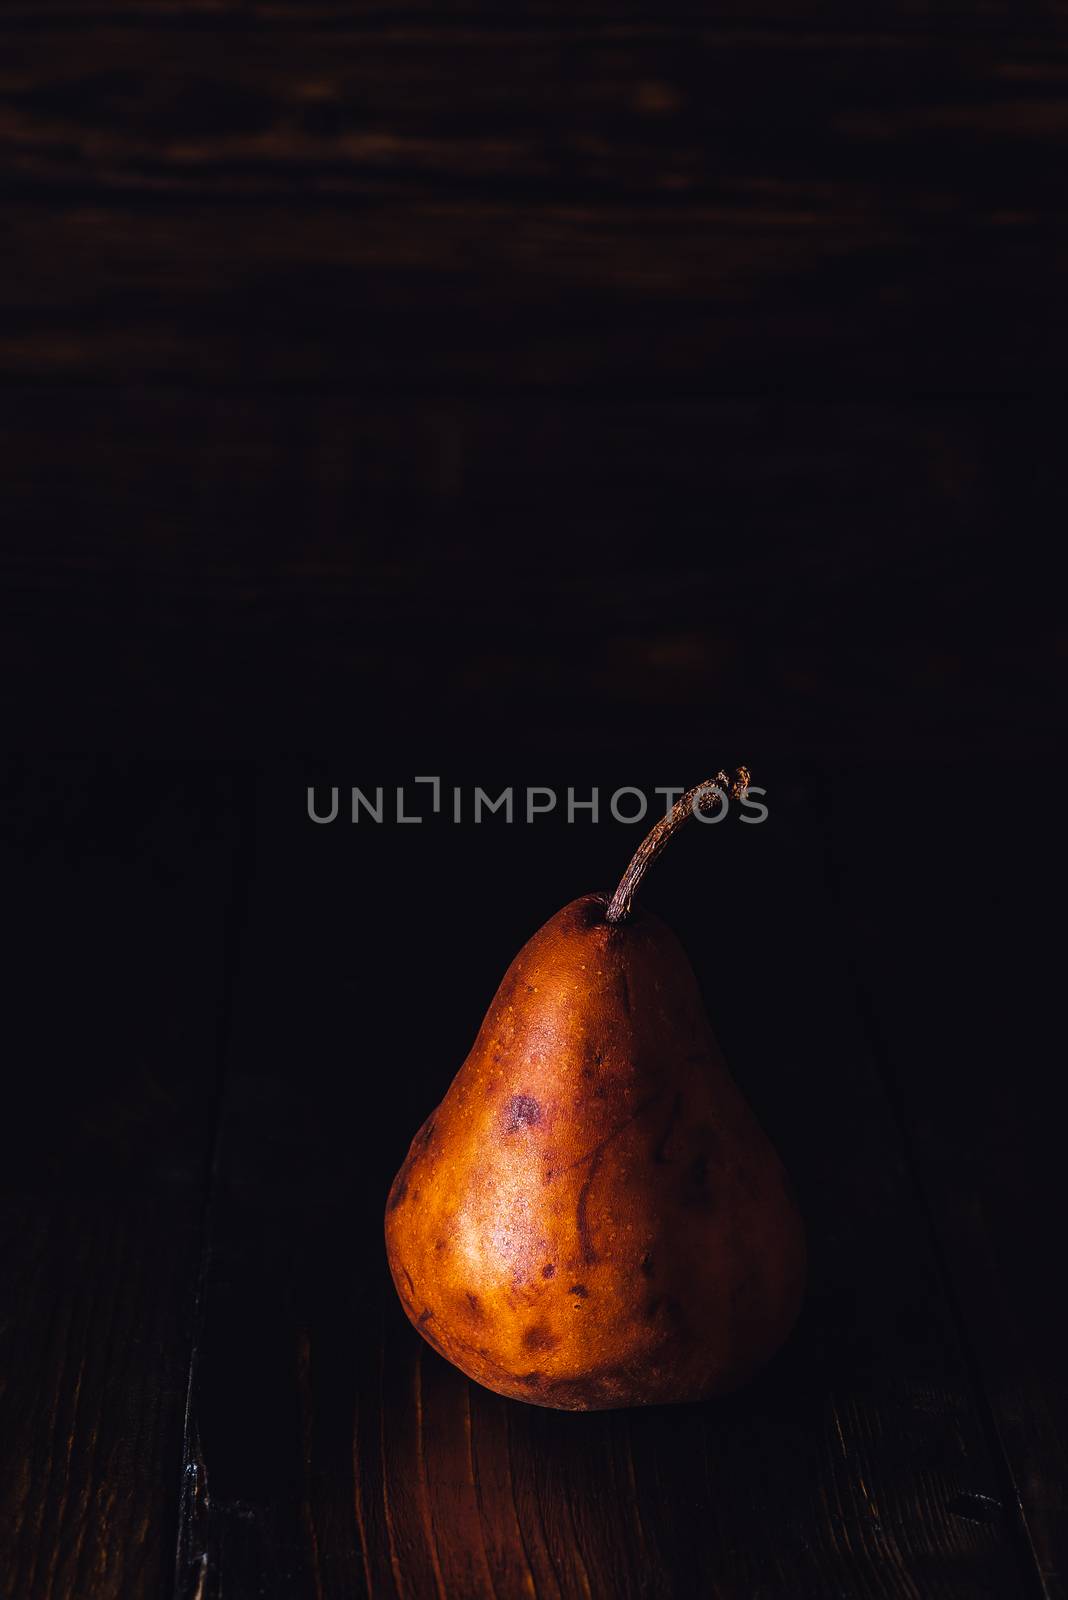 One Golden Pear on Dark Background. Vertical Photo with Copy Space